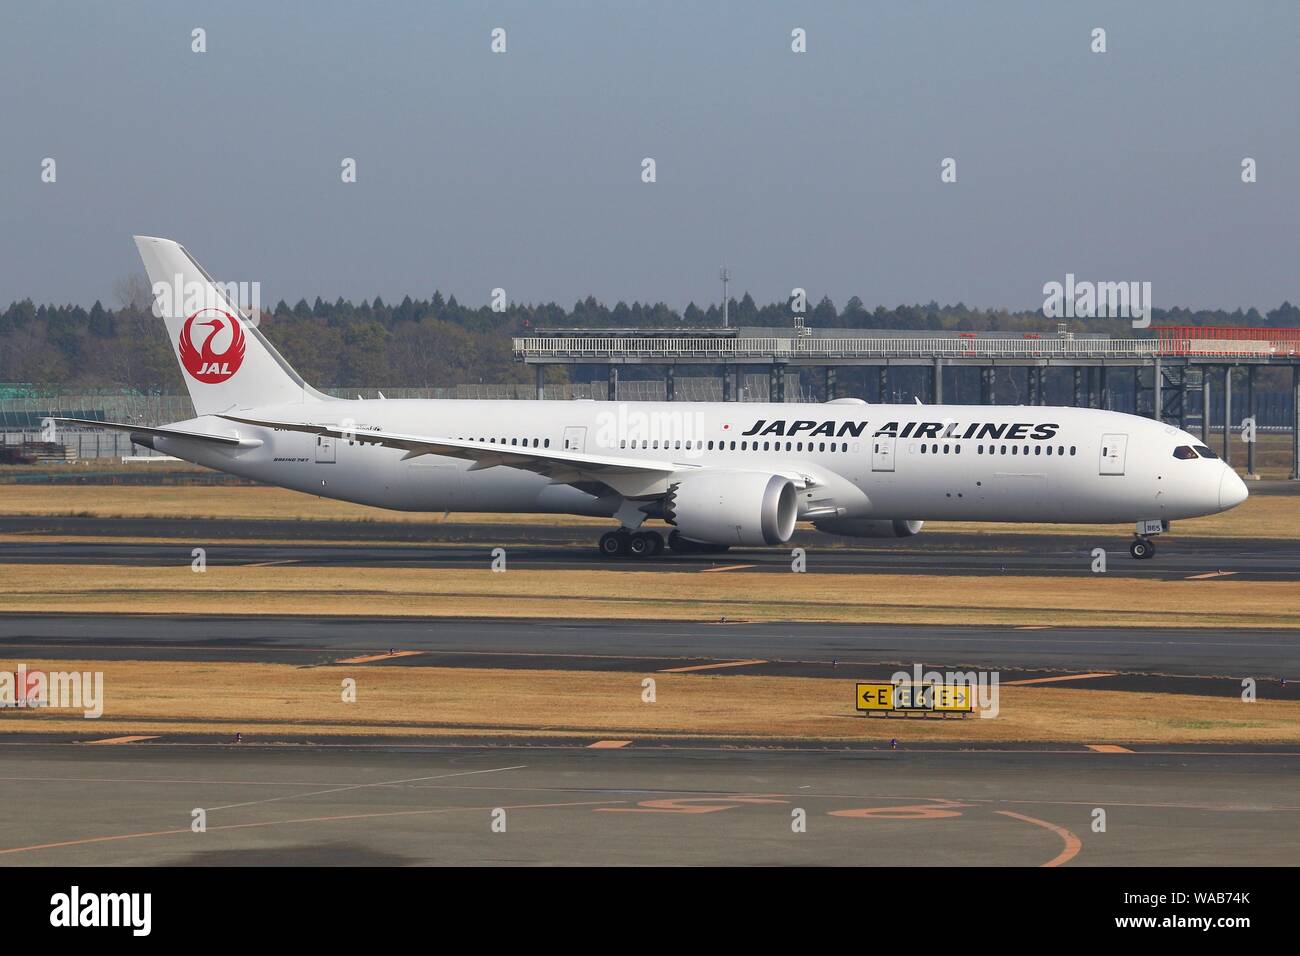 TOKYO, JAPAN - DECEMBER 5, 2016: Japan Airlines Boeing 787 taxiing at Narita Airport of Tokyo. The airport is the 2nd busiest airport of Japan (after Stock Photo